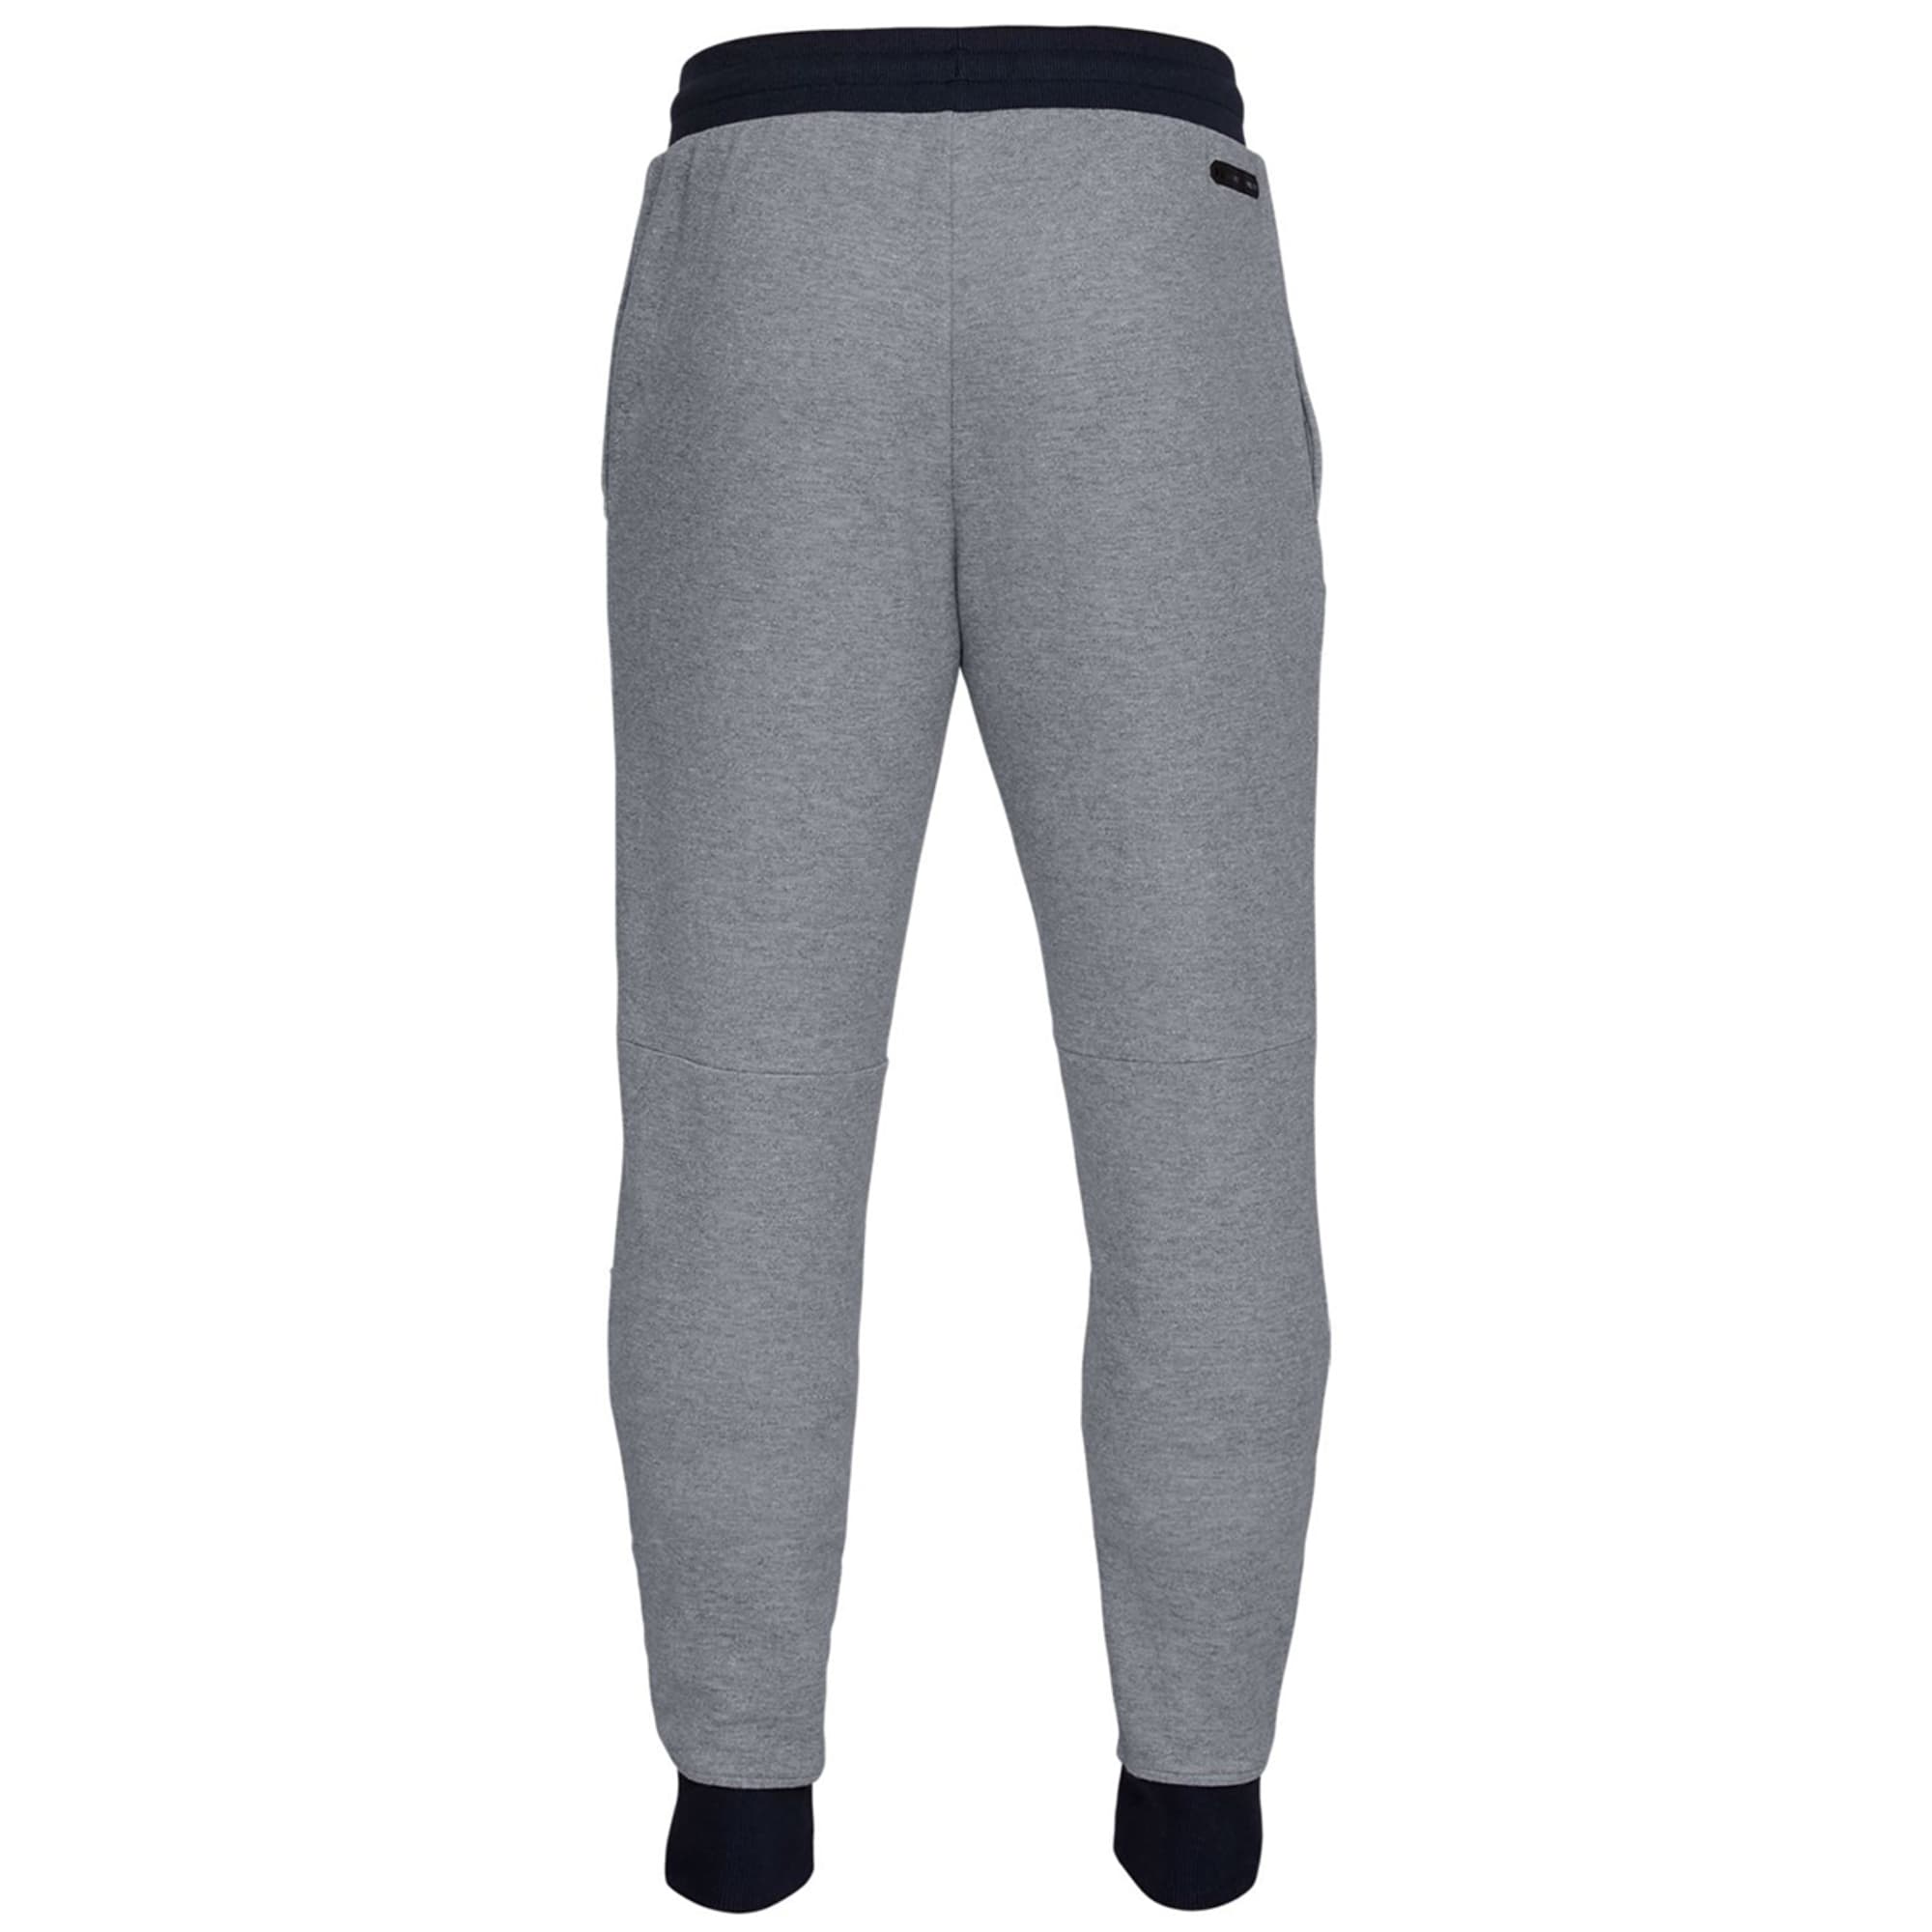 UNDER ARMOUR Men's Unstoppable Double Knit Jogger Pants - Eastern